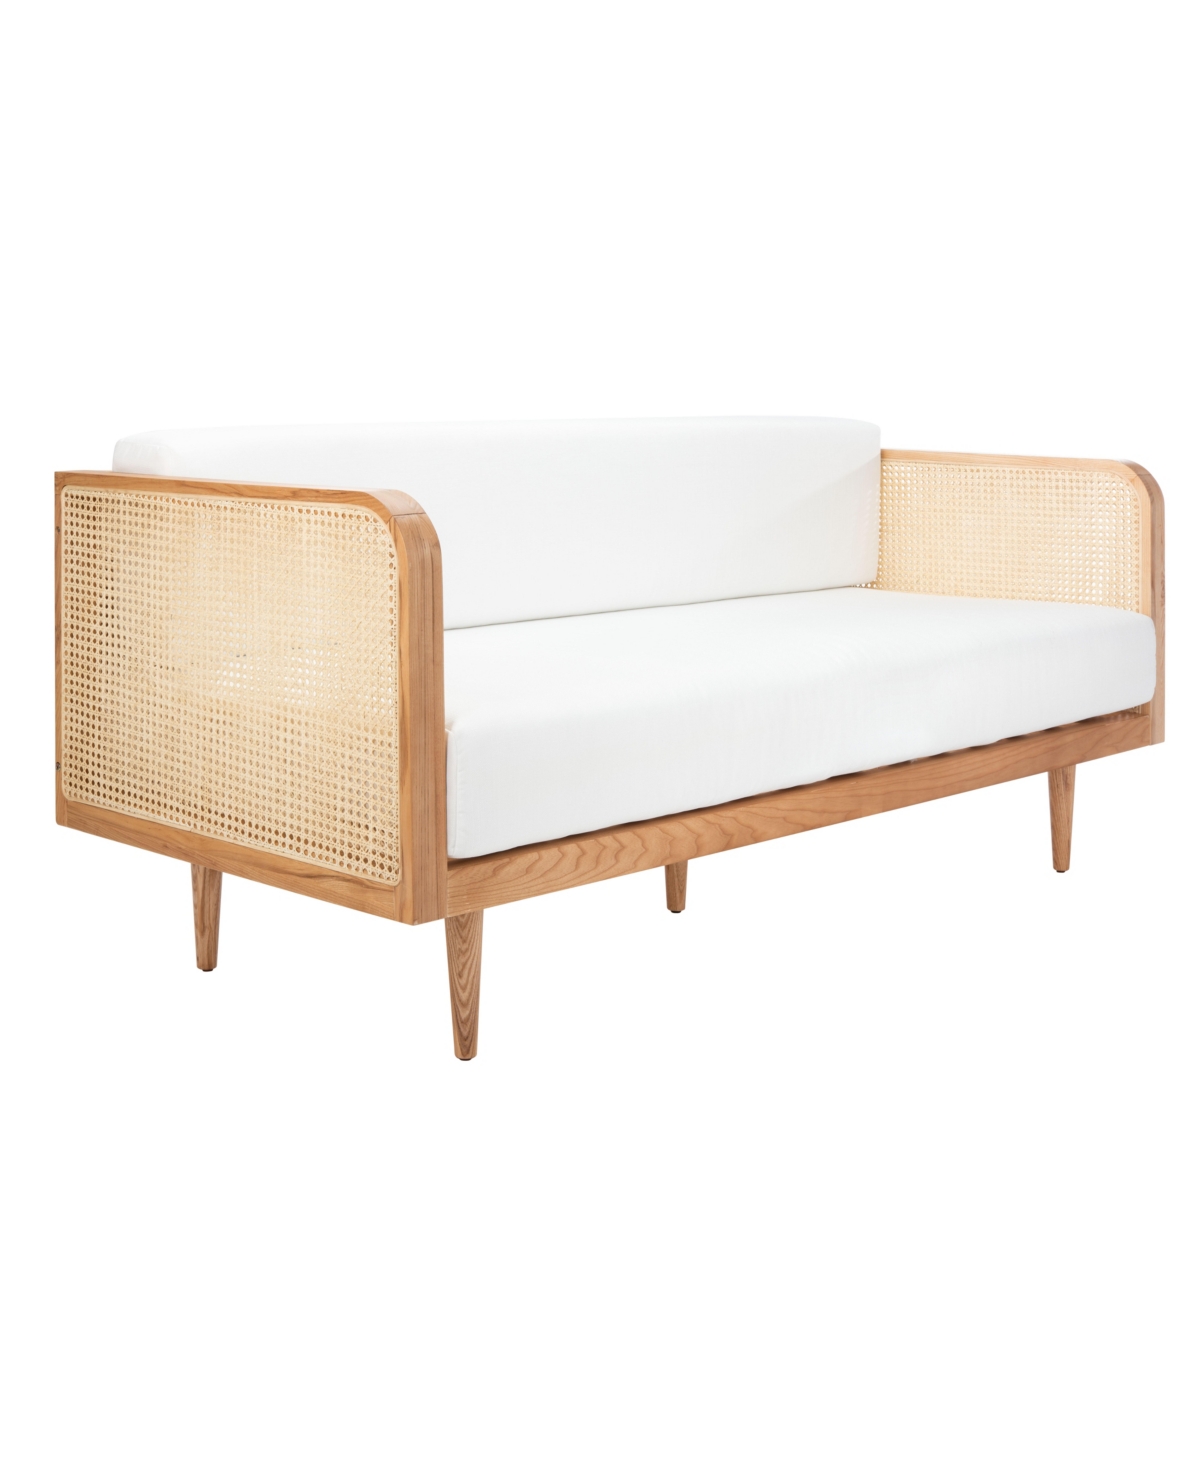 Safavieh Helena 75" French Cane Daybed In Natural